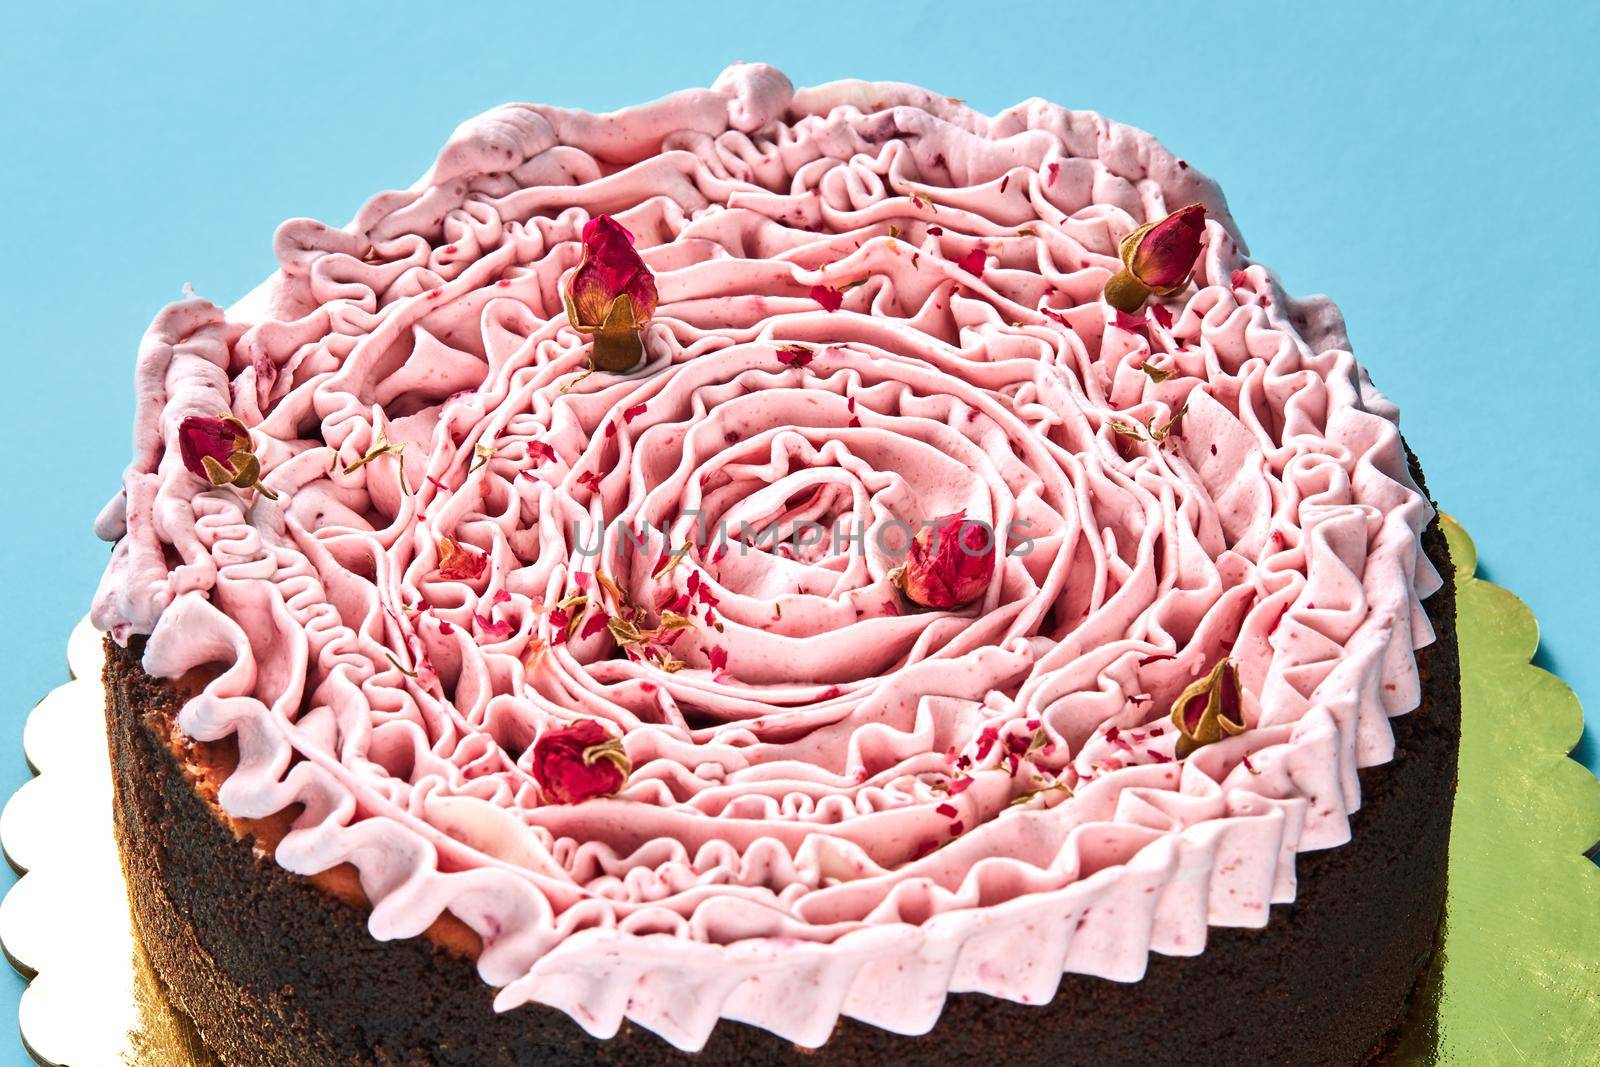 Close-up shot of a pink cream cake decorated with a small dried rosebuds, standing on a gold stand against a blue studio background. Pastries, delicious holiday bake.